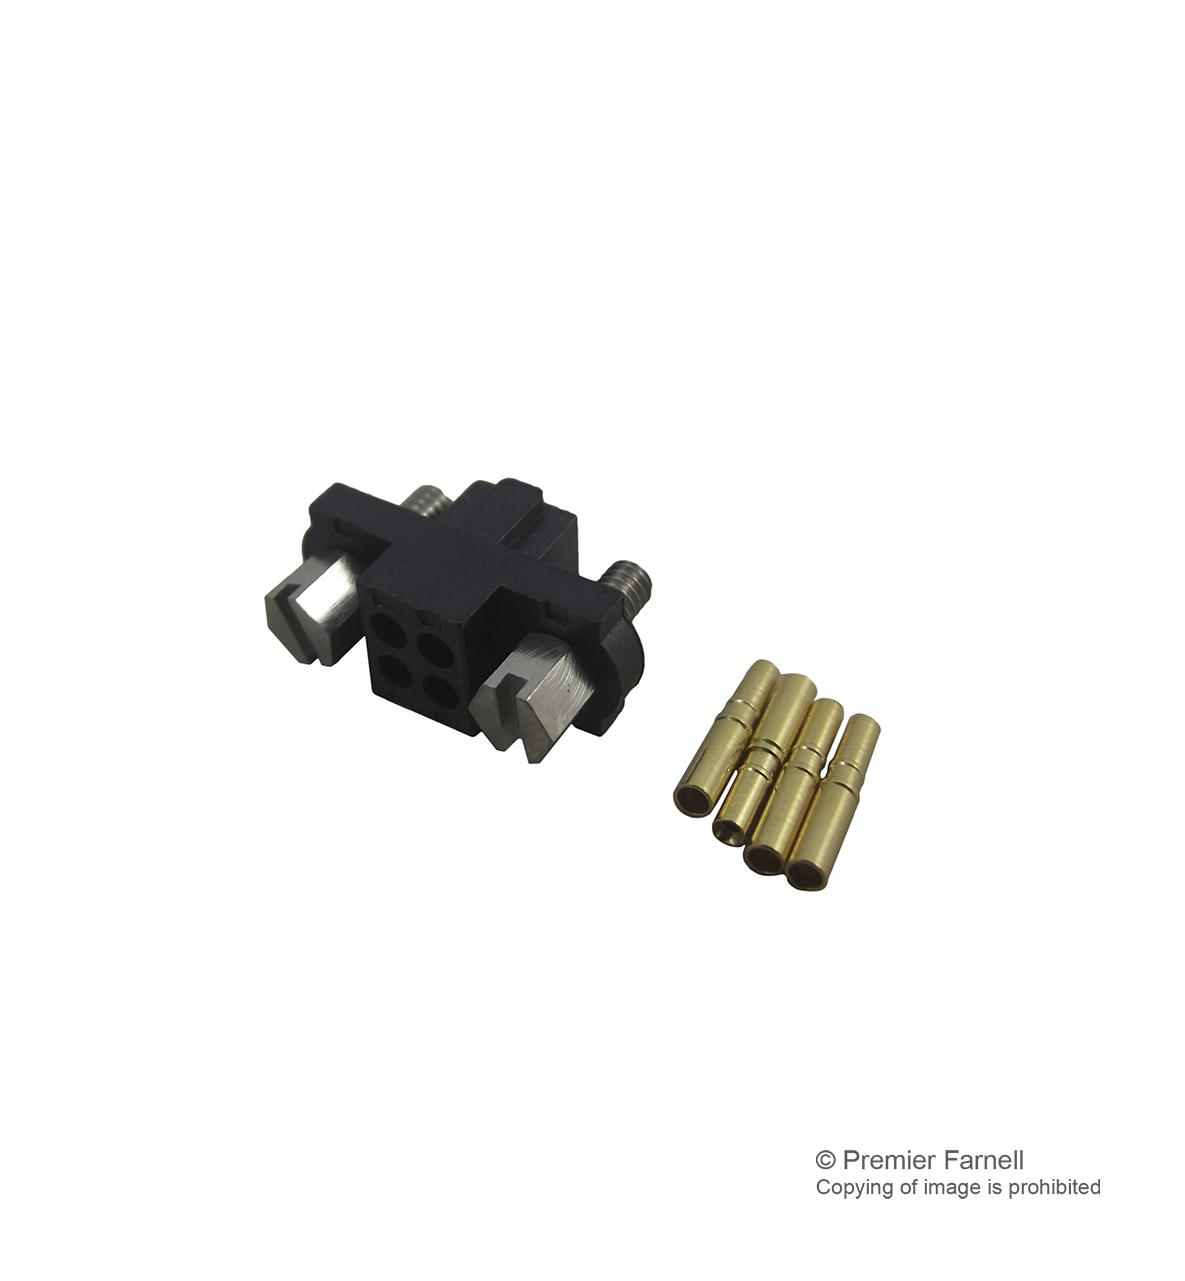 M80-4610405 CONNECTOR, RECEPTACLE, 4POS, 2ROW, 2MM HARWIN